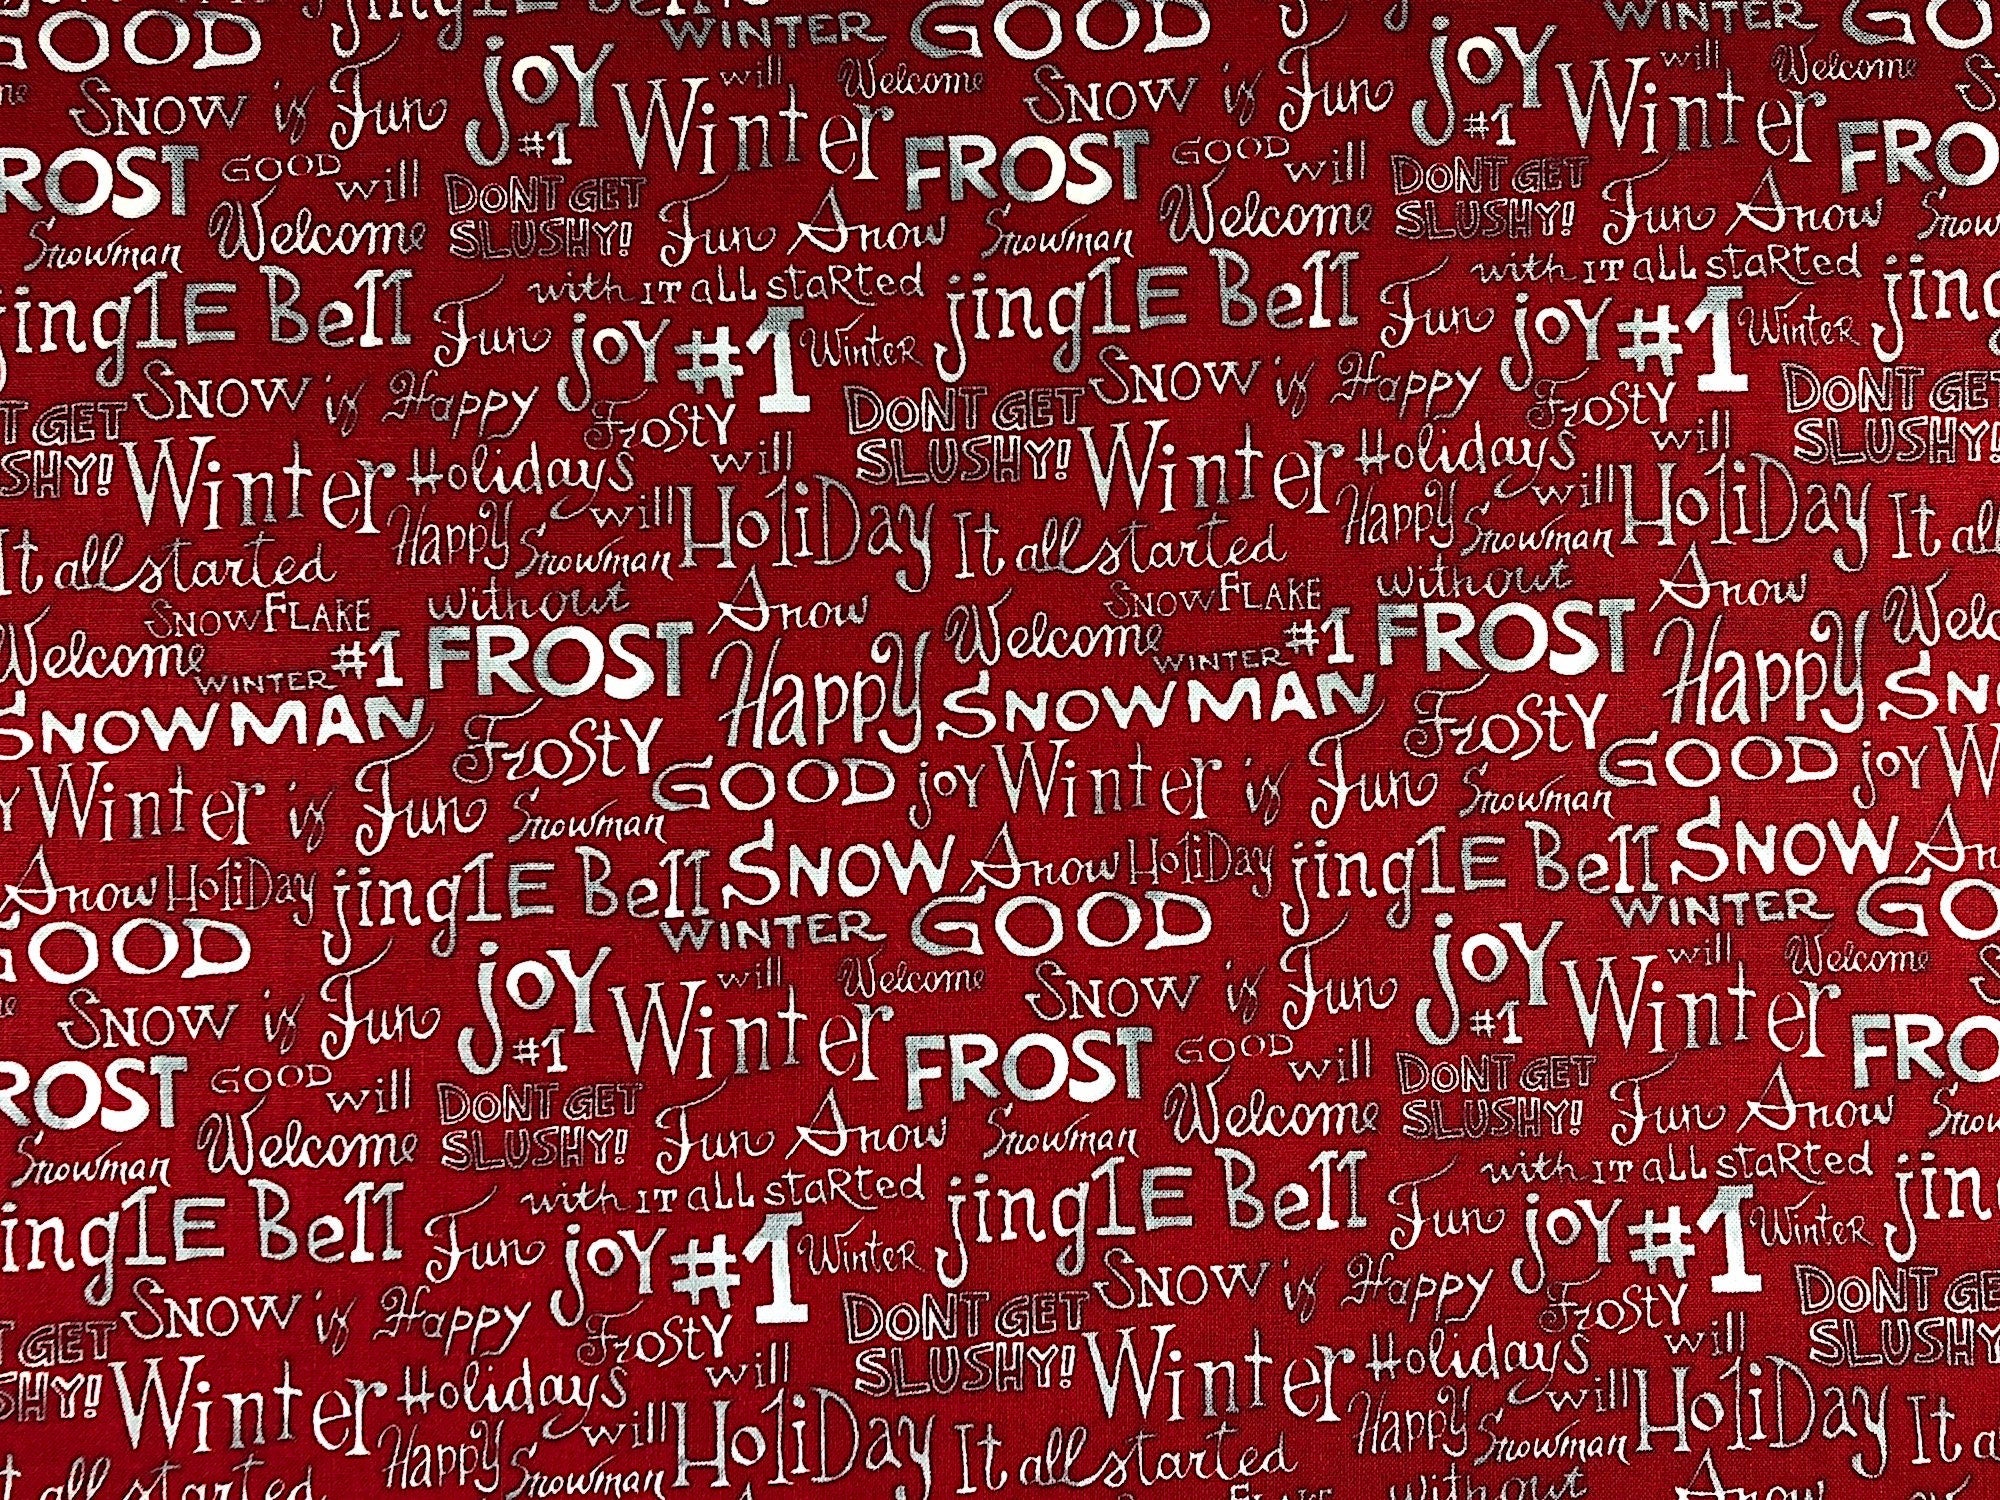 This fabric is covered with rows of winter sayings on a red background. Some of the words are: Joy, Winter, Frost, Jingle Bells, Fun, Snowman, Welcome and more.